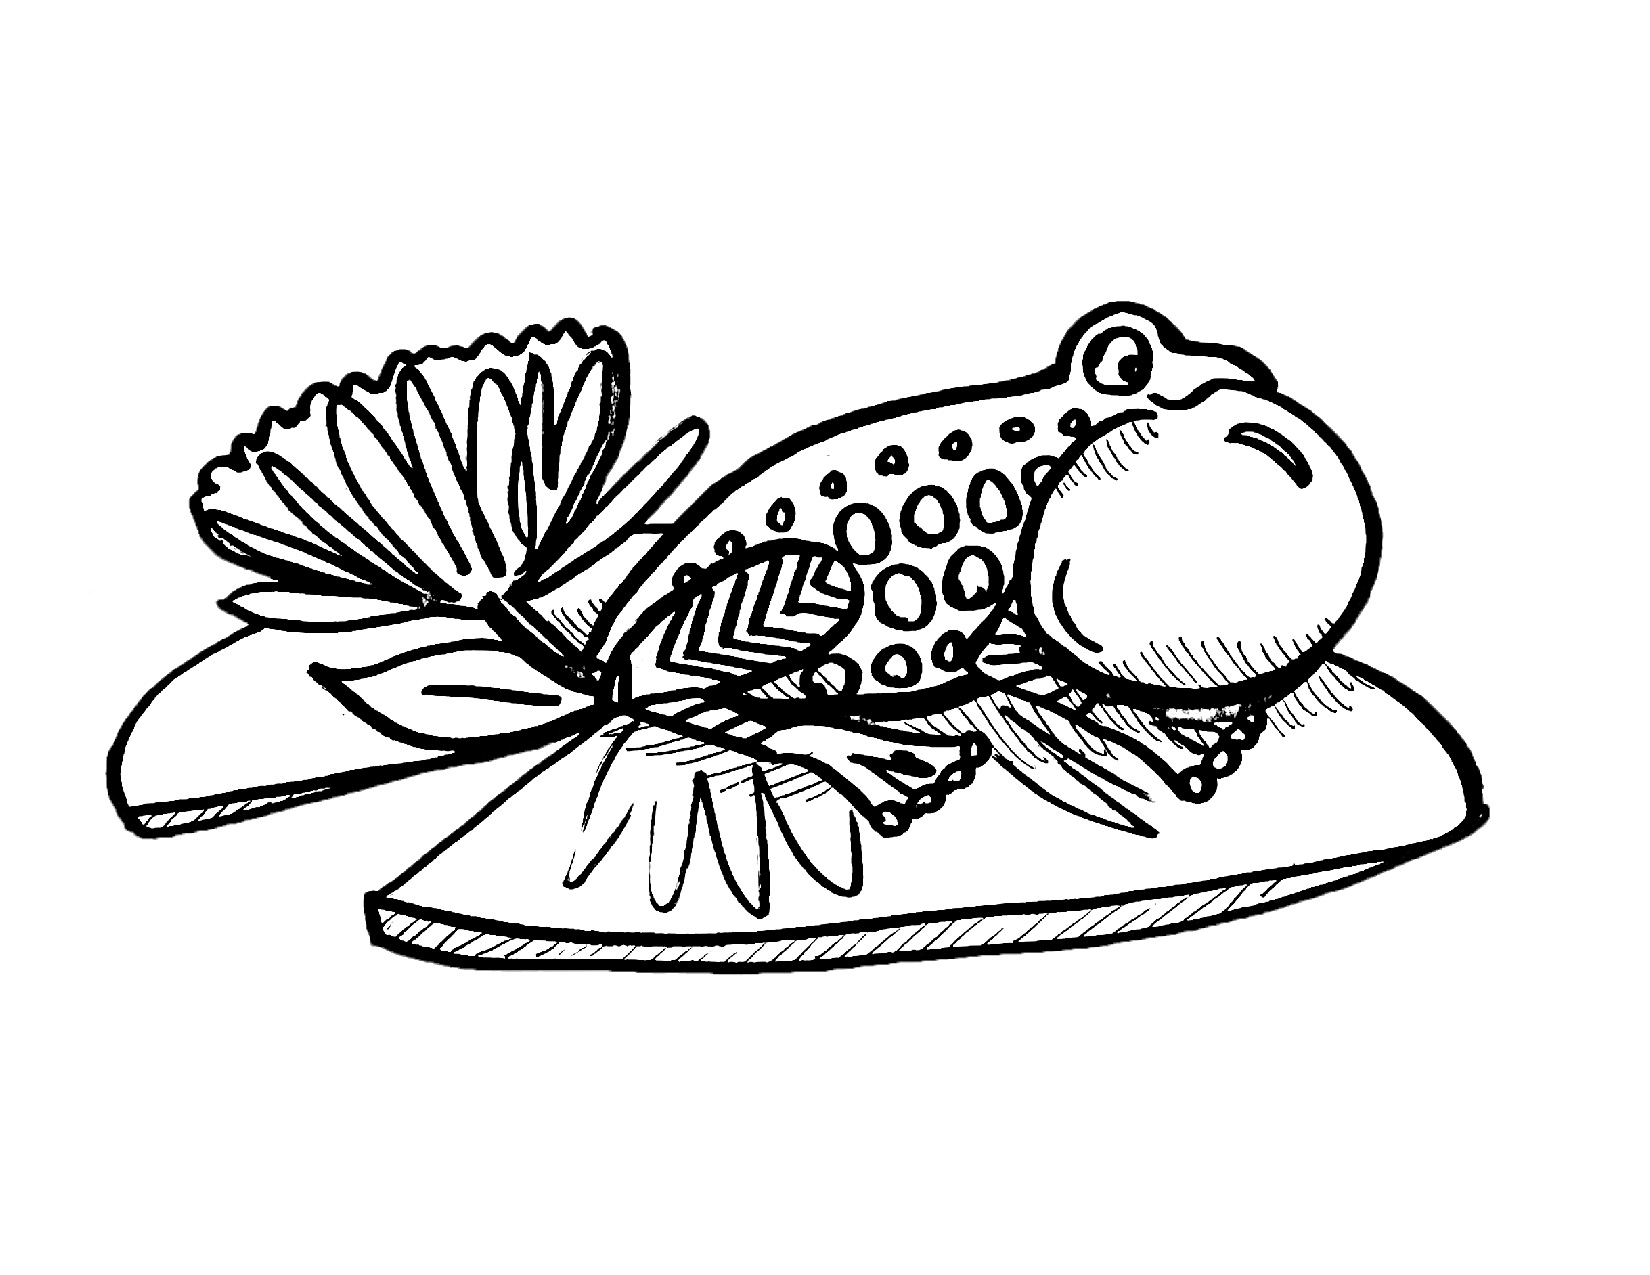 Coloring page of a frog on a lily pad